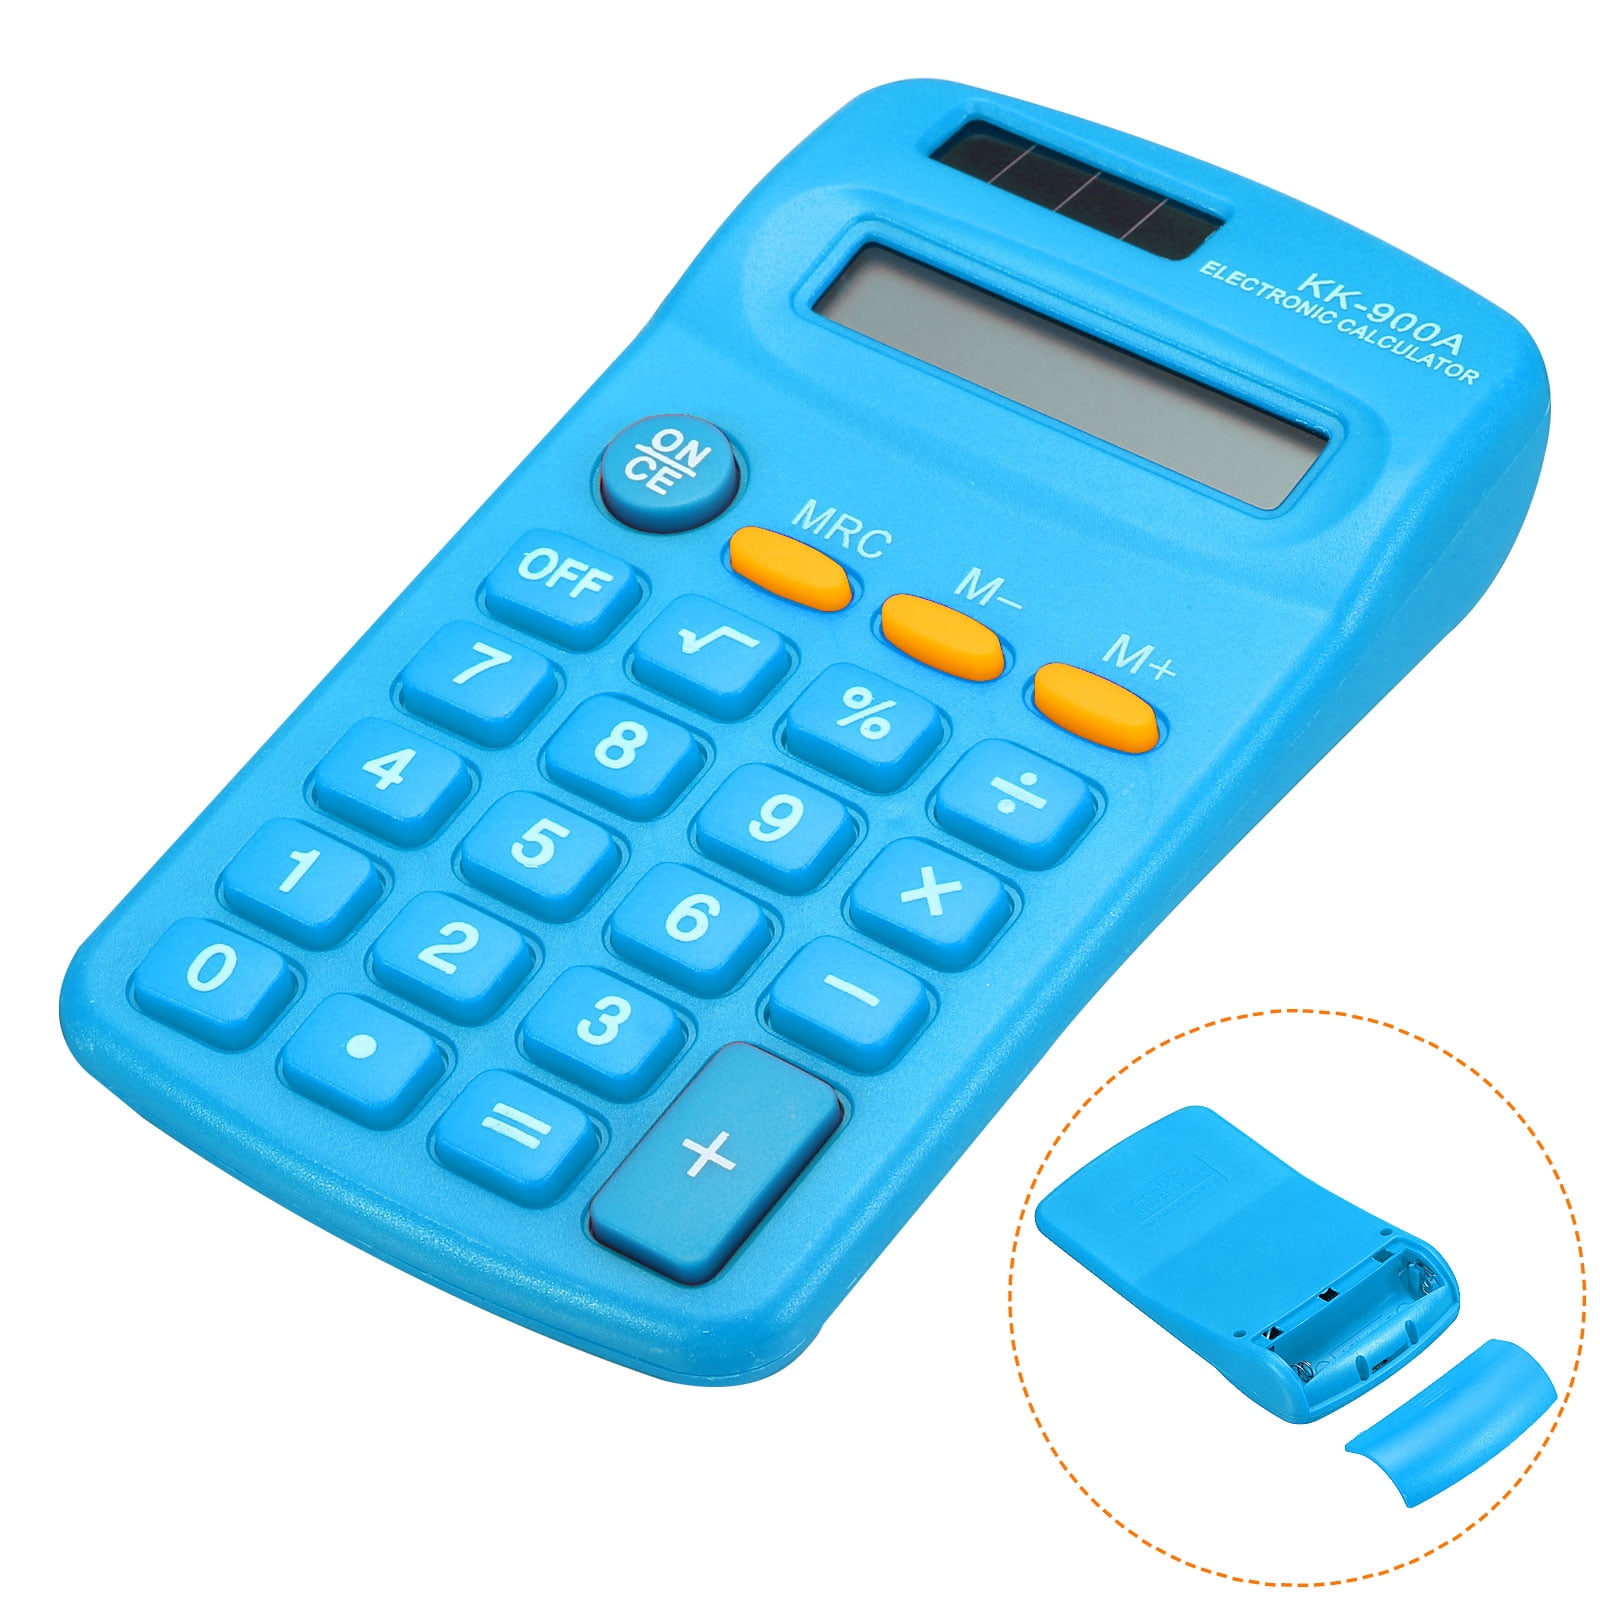 Uxcell Small Pocket Calculator Home Office Handheld Calculators 8